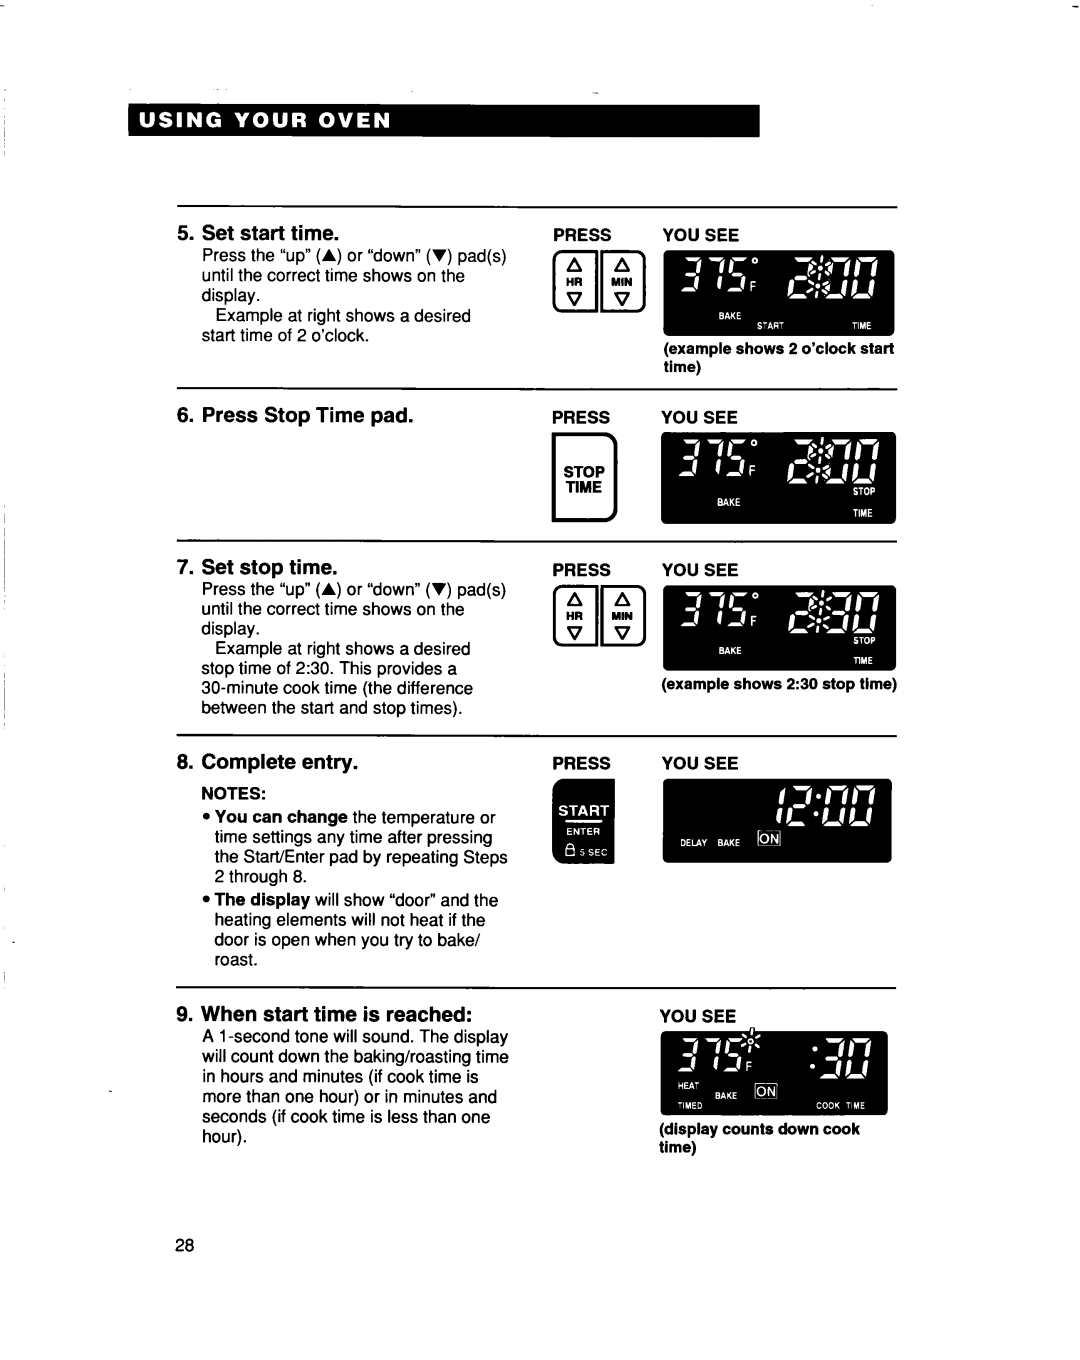 Whirlpool RBS307PD warranty Set start time, Press Stop Time pad 7.Set stop time, Complete entry, When start time is reached 